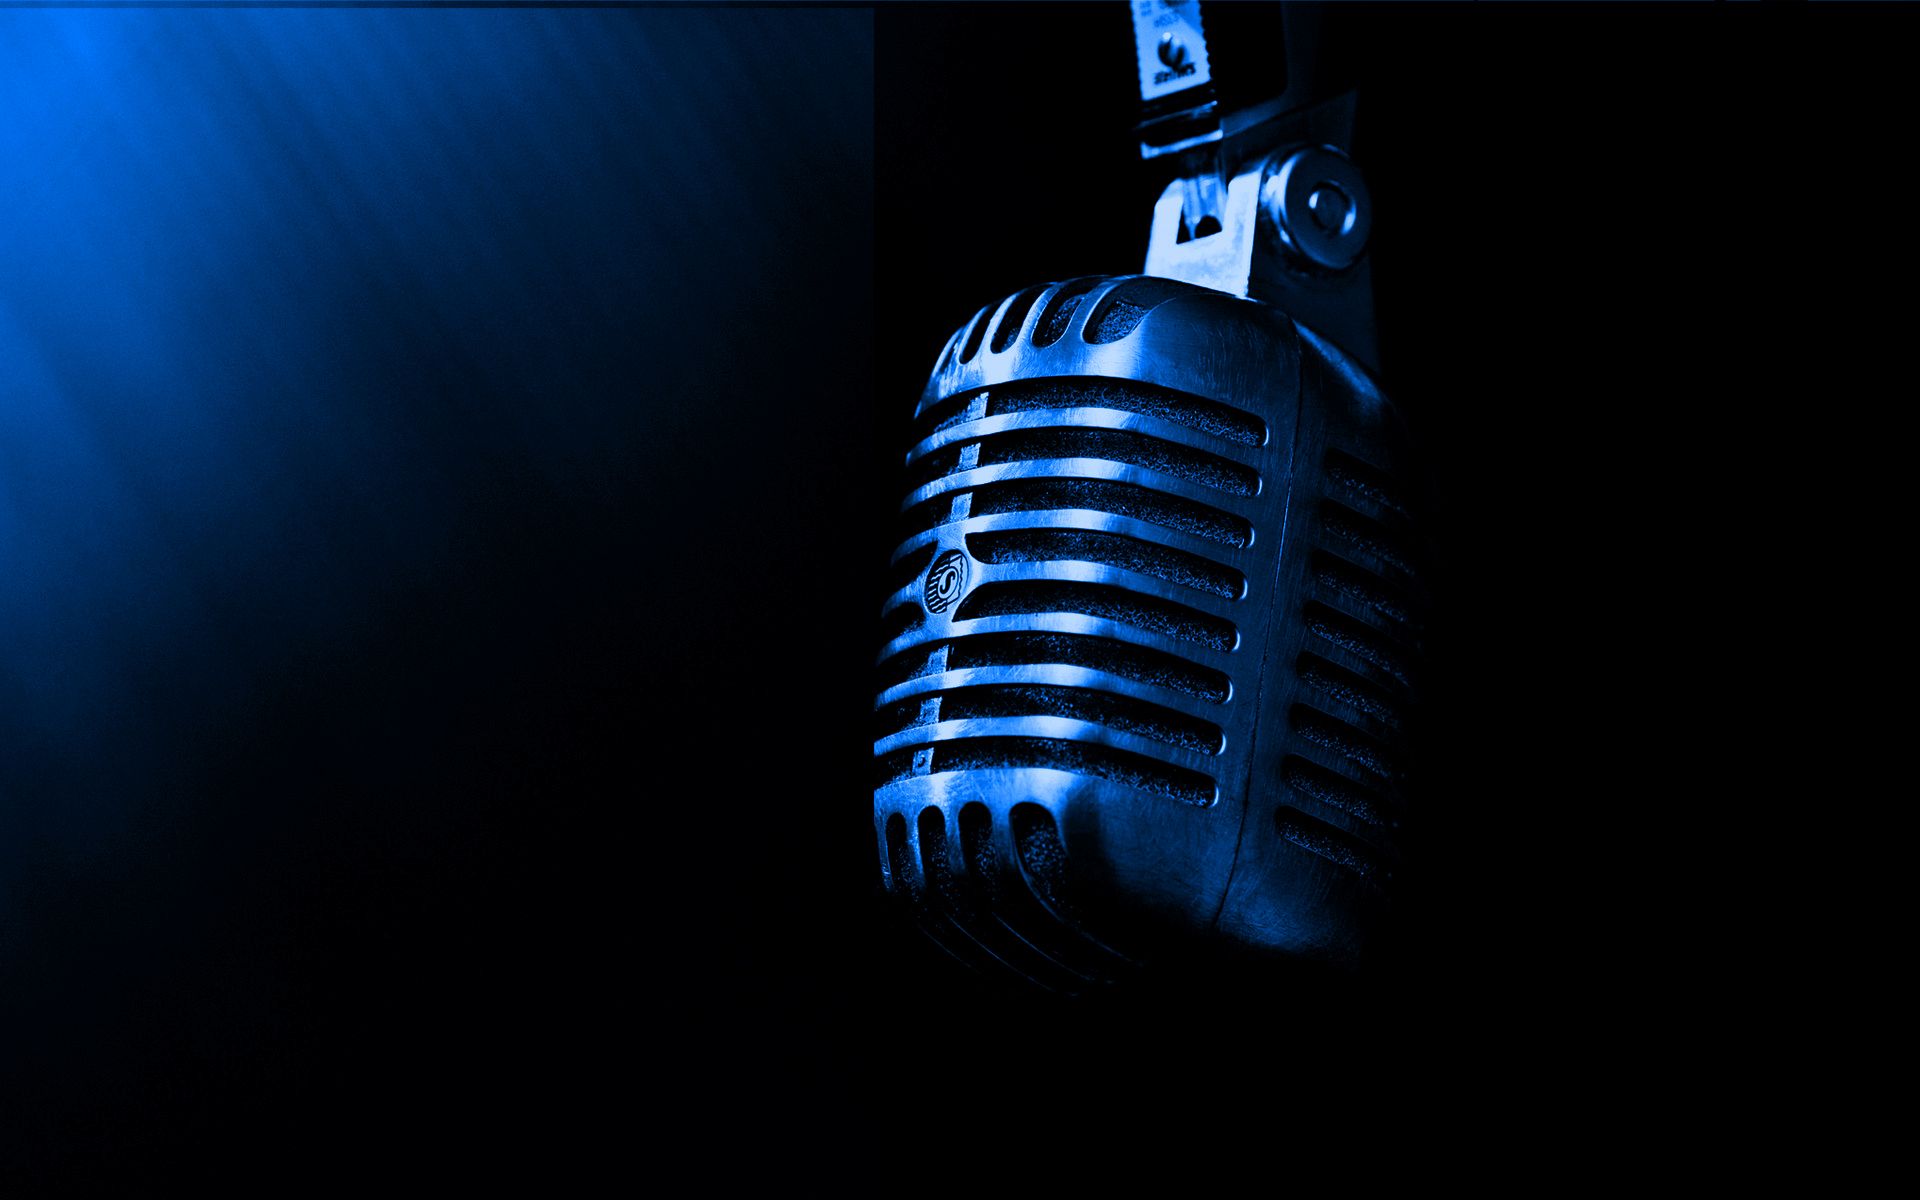 Blue Microphone Wallpaper Top Background